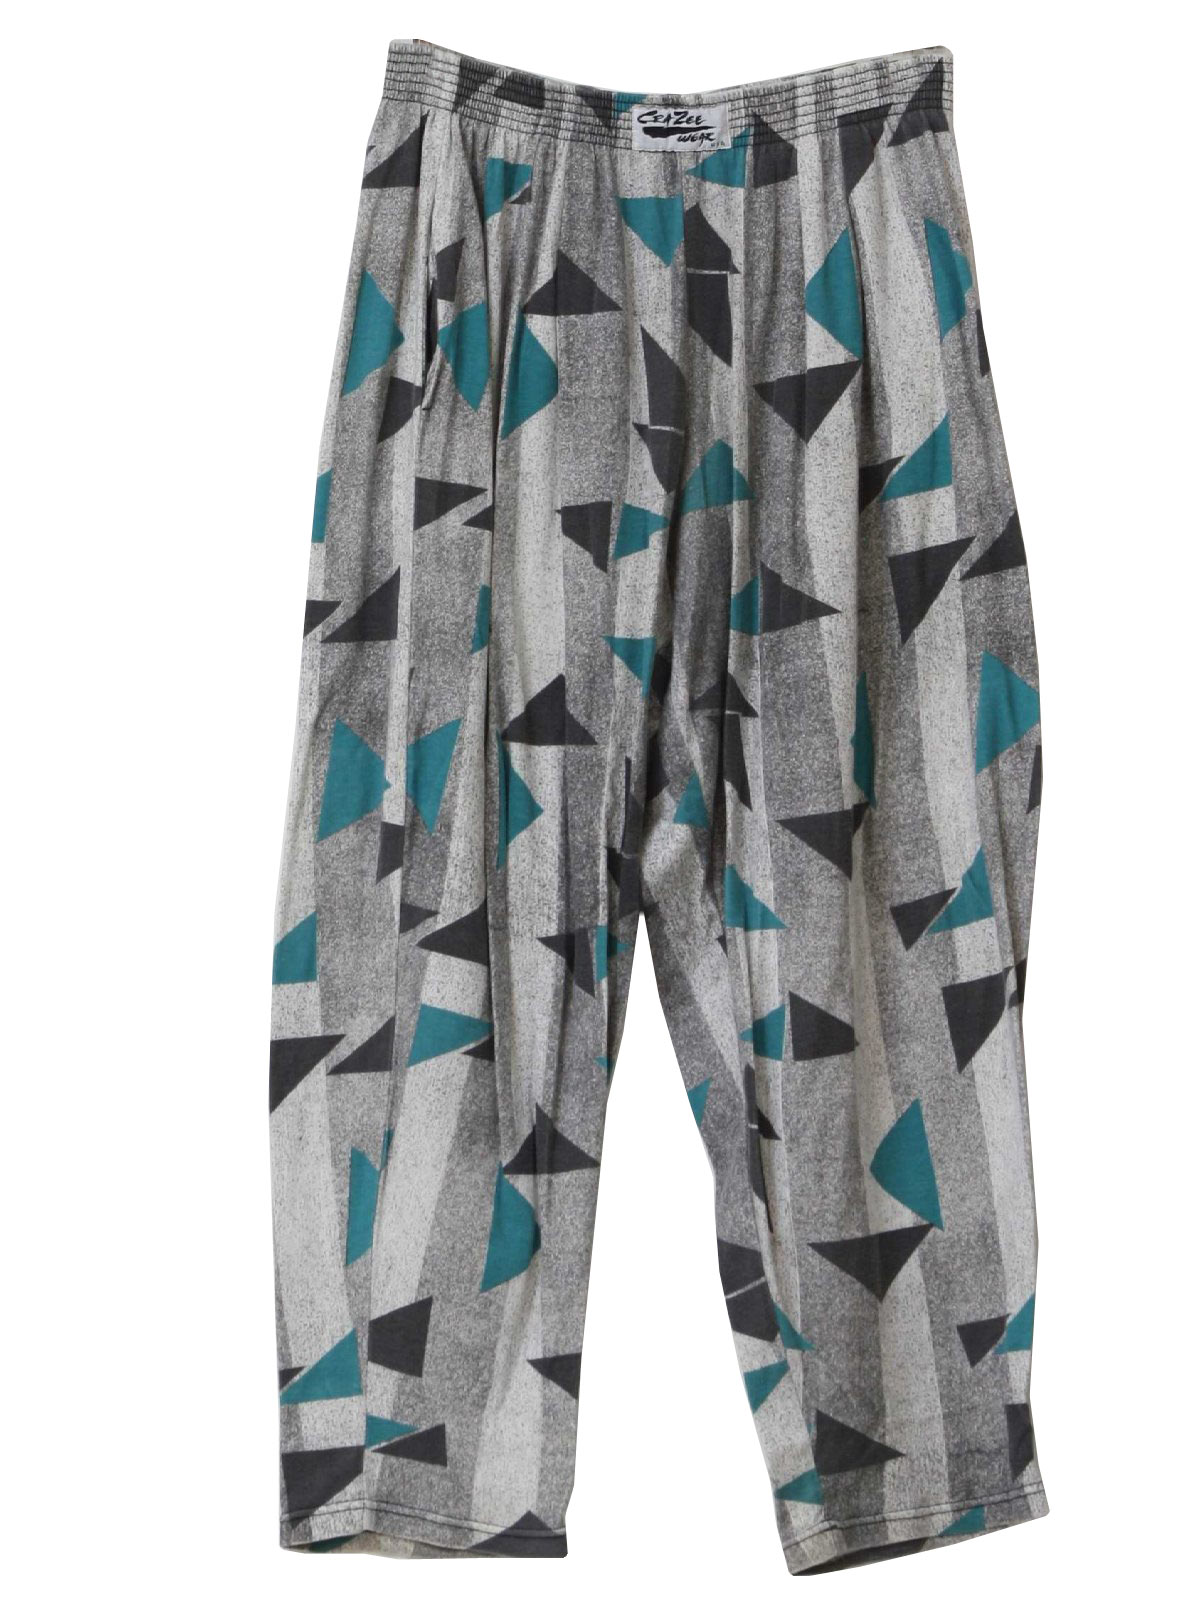 Eighties Vintage Pants: 80s -Crazee Wear- Mens teal, gray, black, light  gray cotton polyester knit striped geometric print totally 80s lounge pants  pullon pants with elasticized waistband, very full cut parachute style